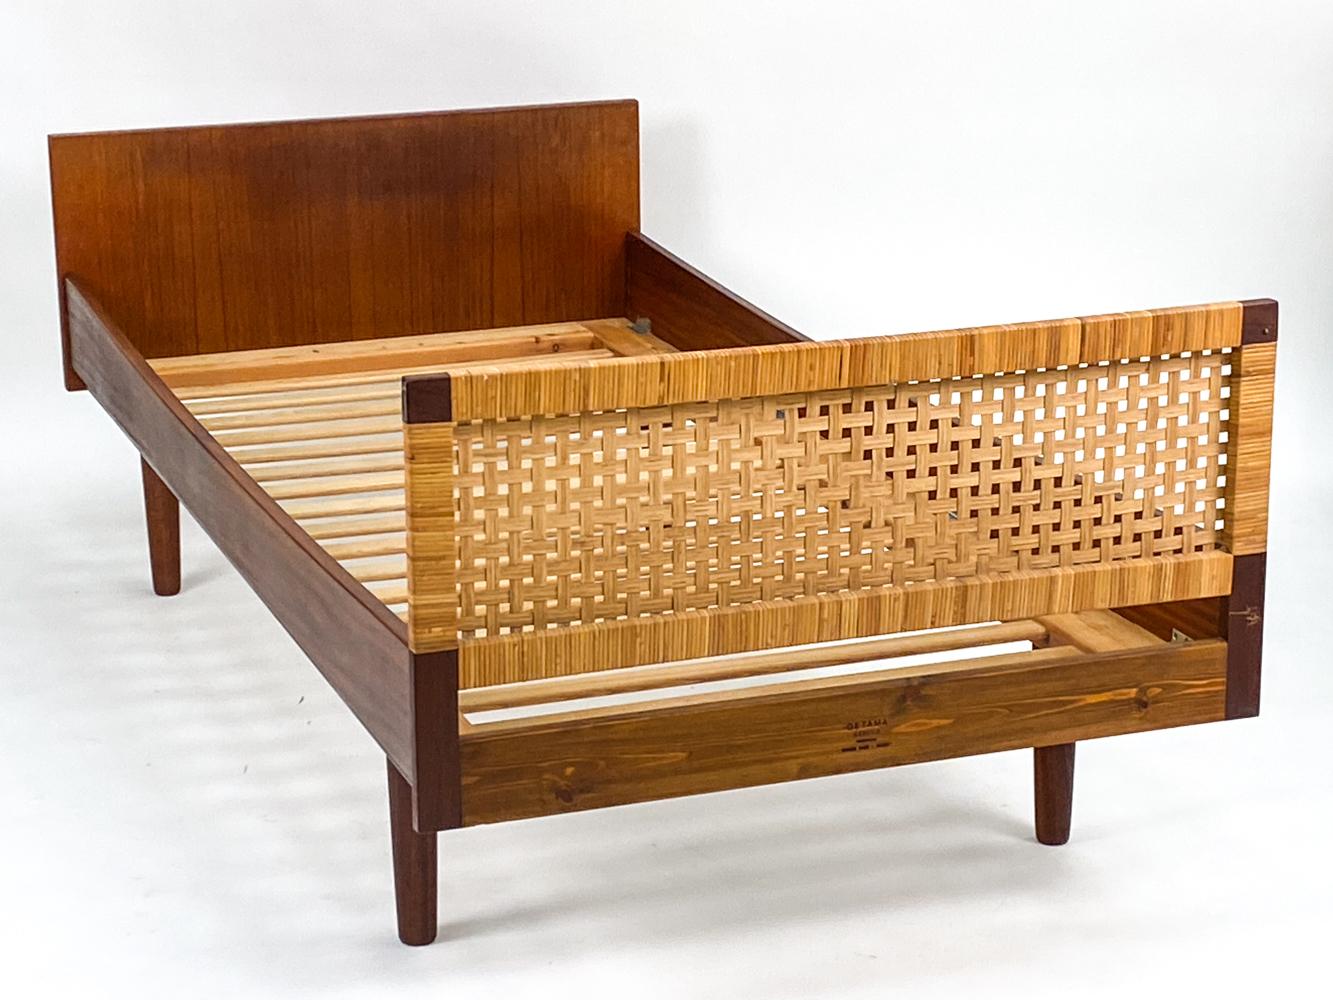 A fabulous Danish mid-century daybed in teak with a caned headboard or footboard, designed by Hans Wegner for GETAMA. With GETAMA stamp to one rail. This fun piece features slat supports for a custom cushion to be used as a daybed or for a custom